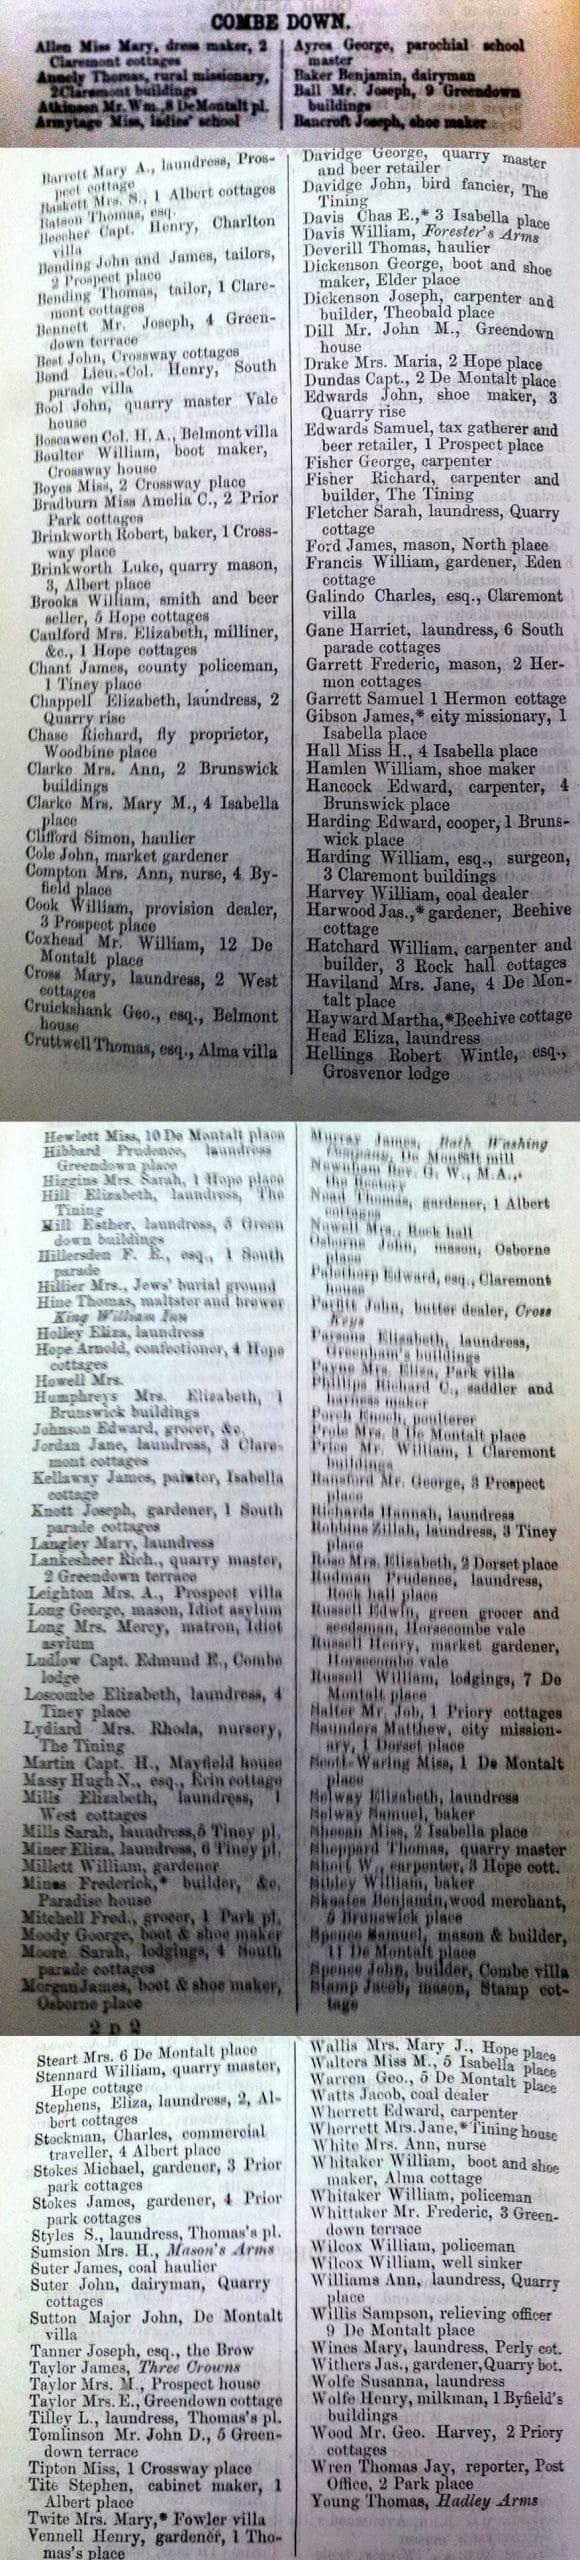 1860 Post Office Directory for Combe Down